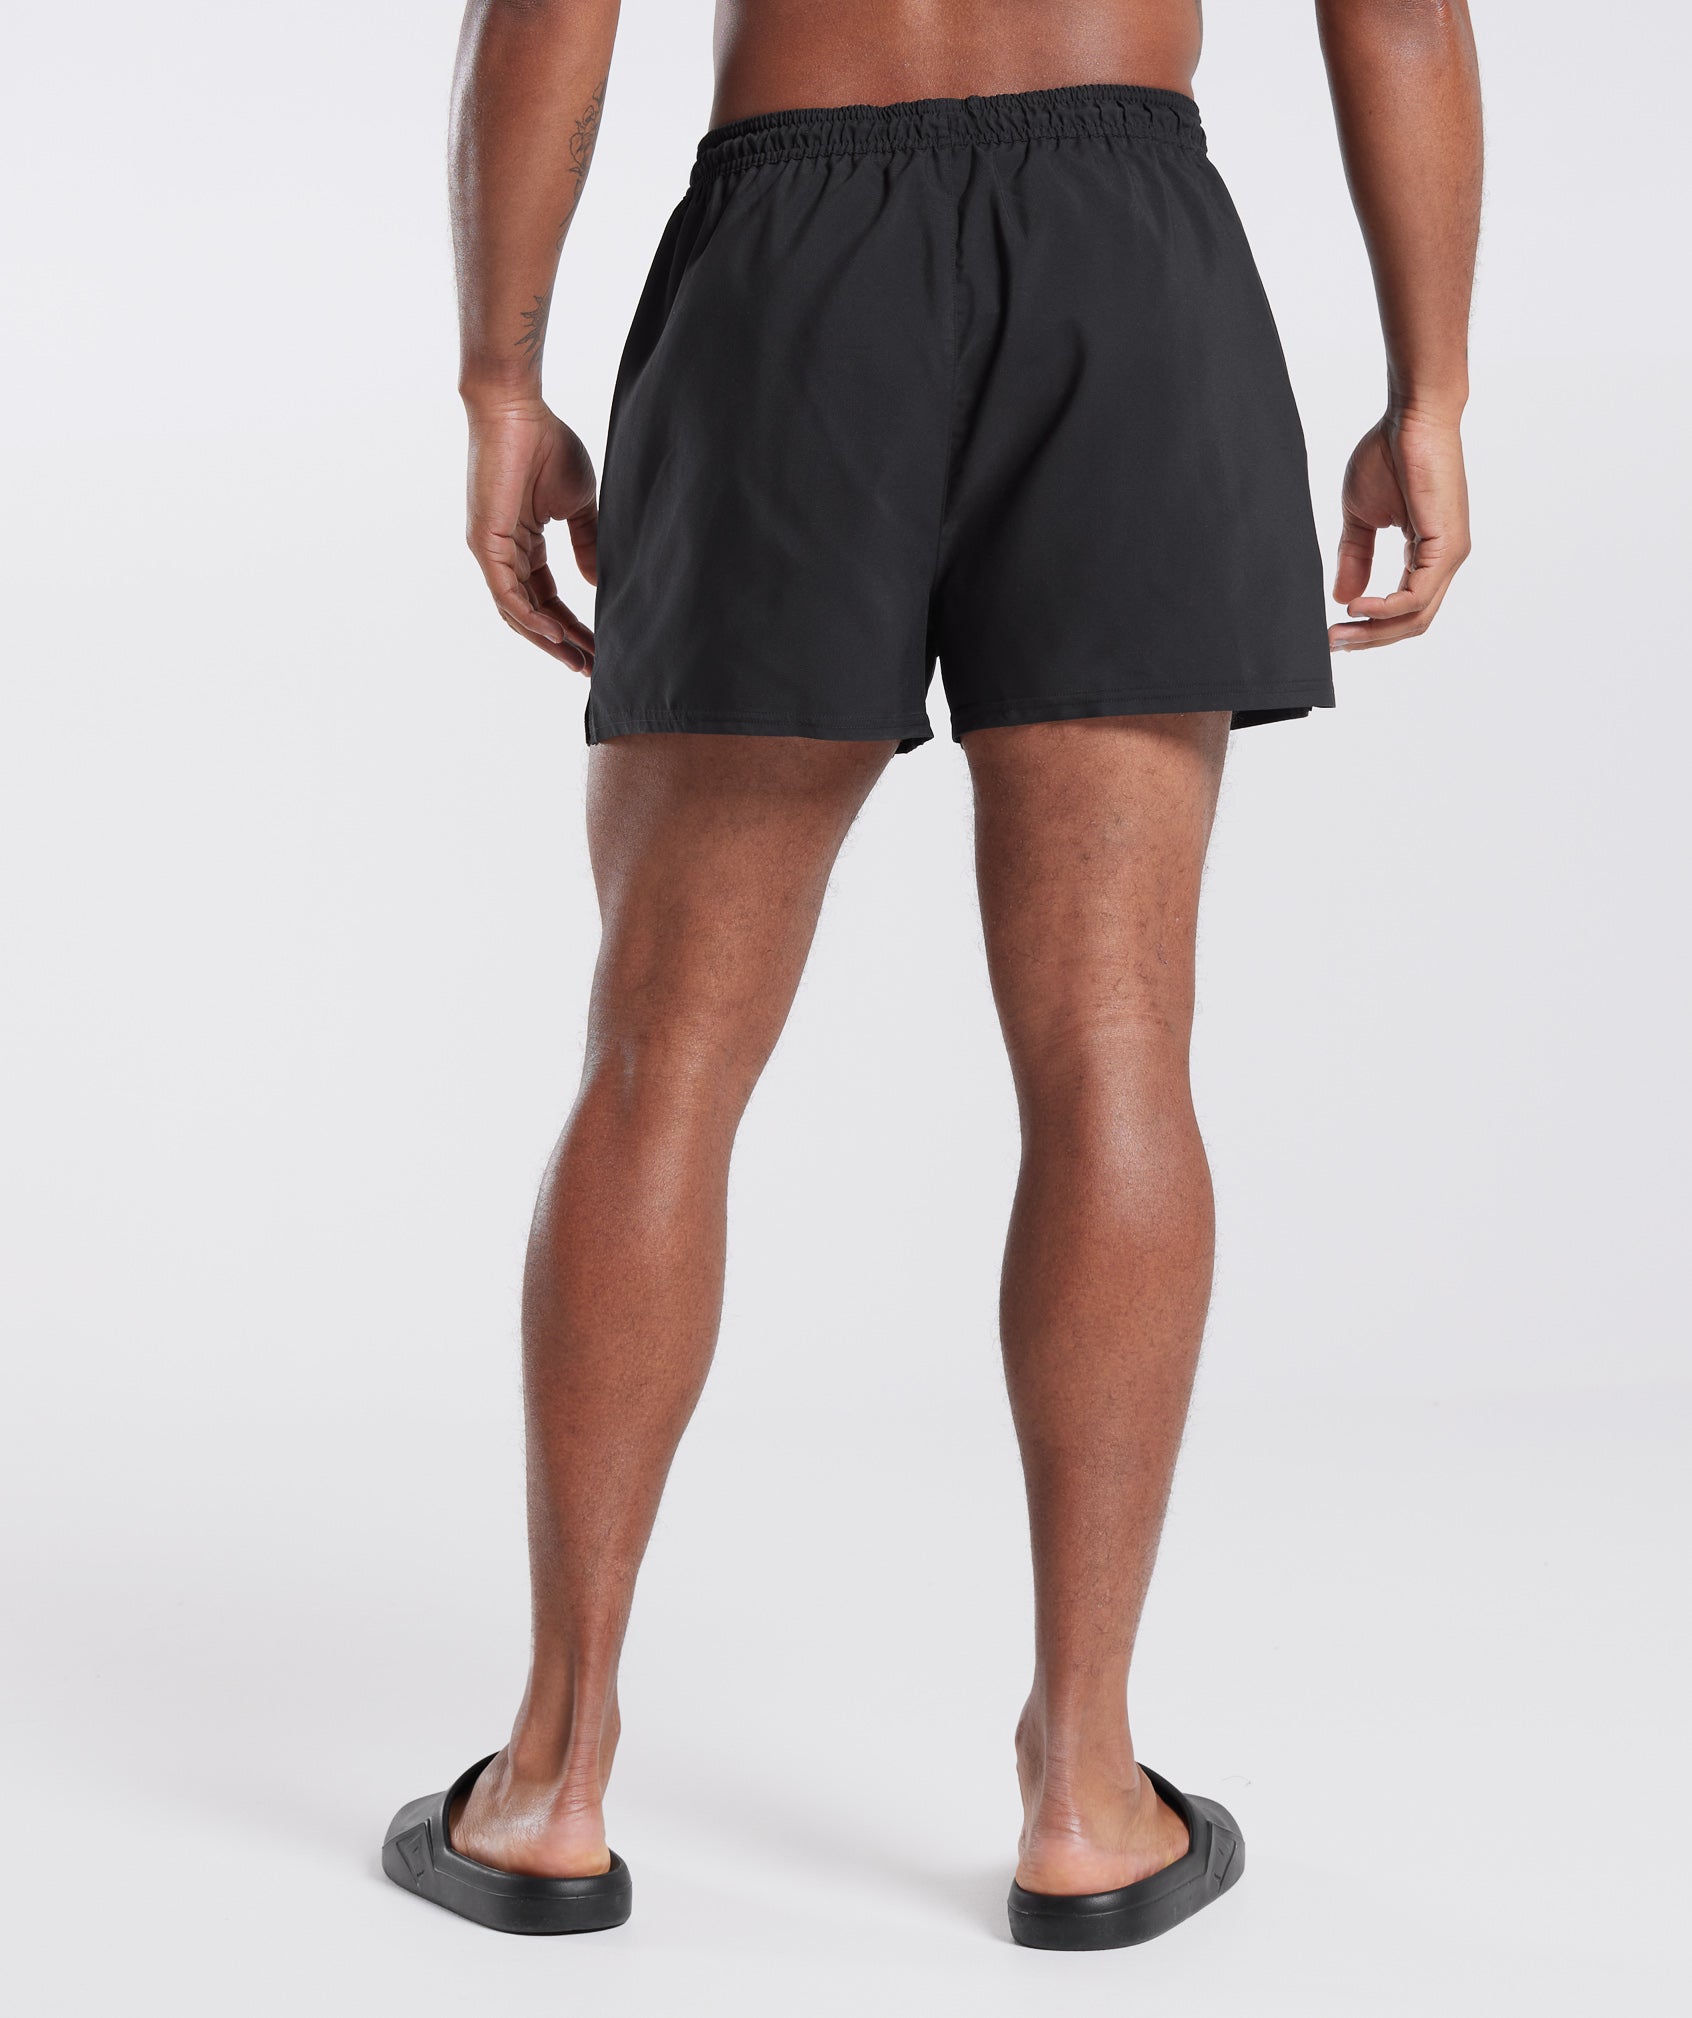 11 Best Men's Swim Shorts For Performance And Poolside Style UK